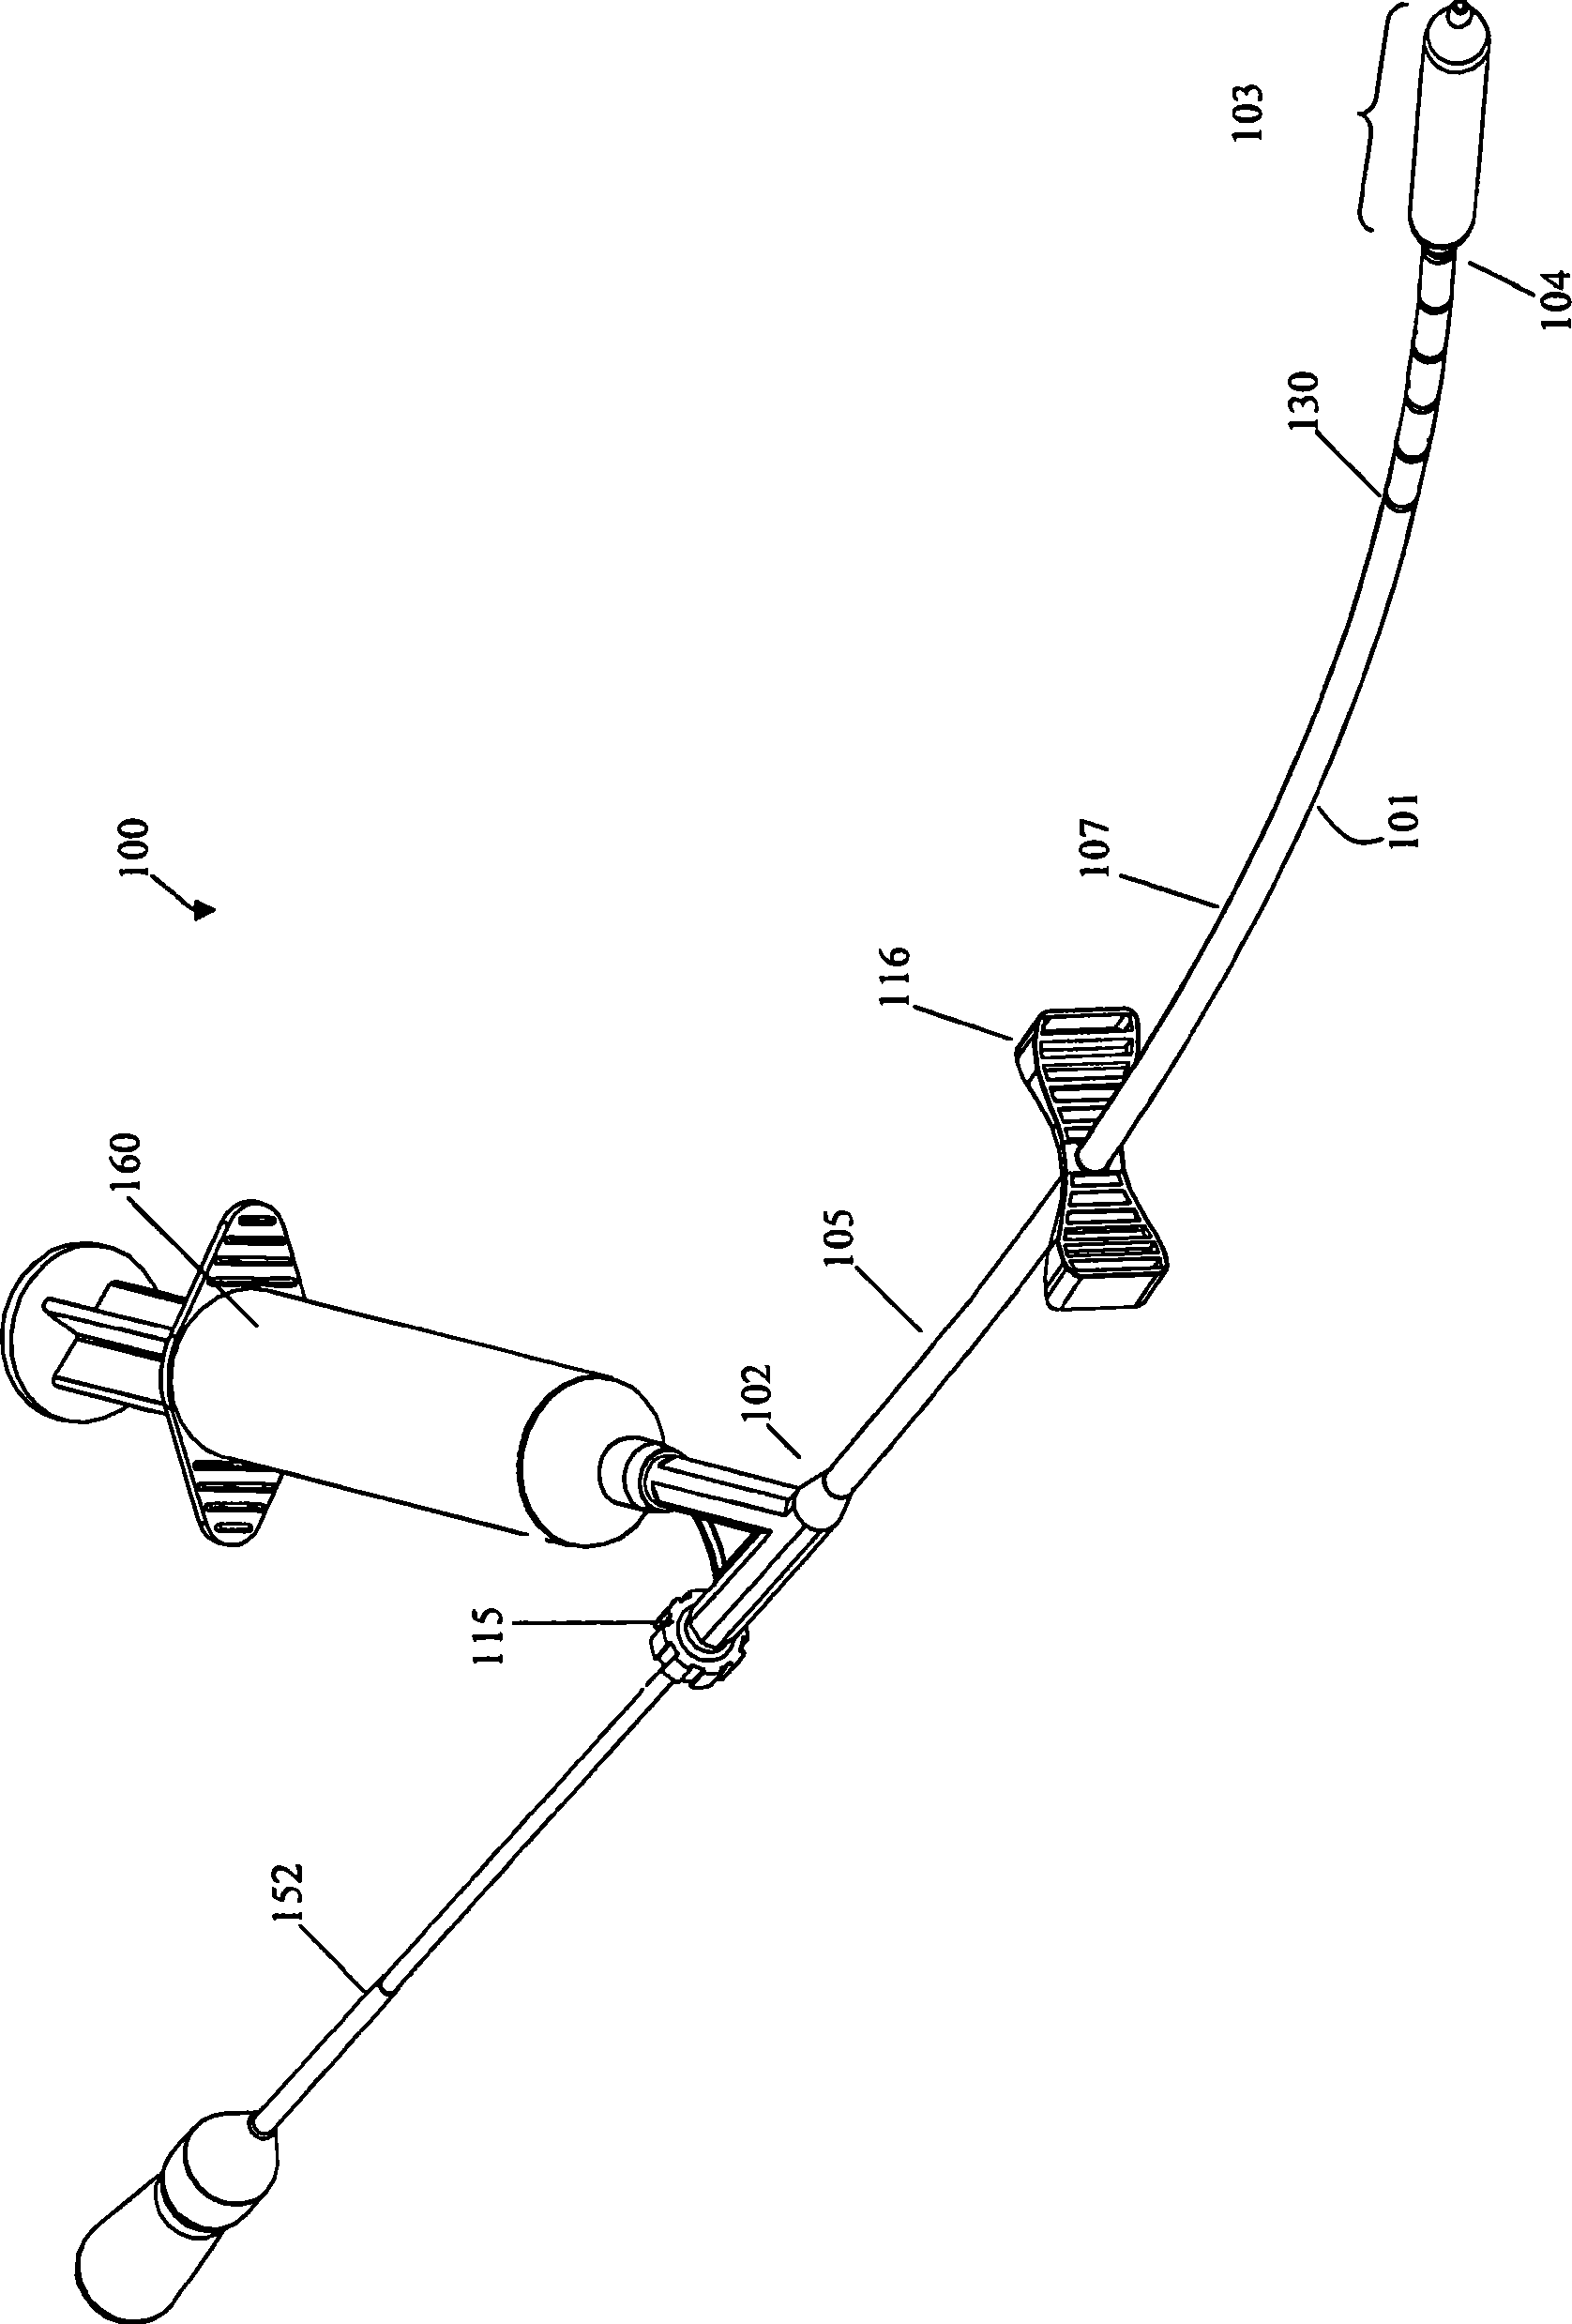 Systems and methods for internal bone fixation